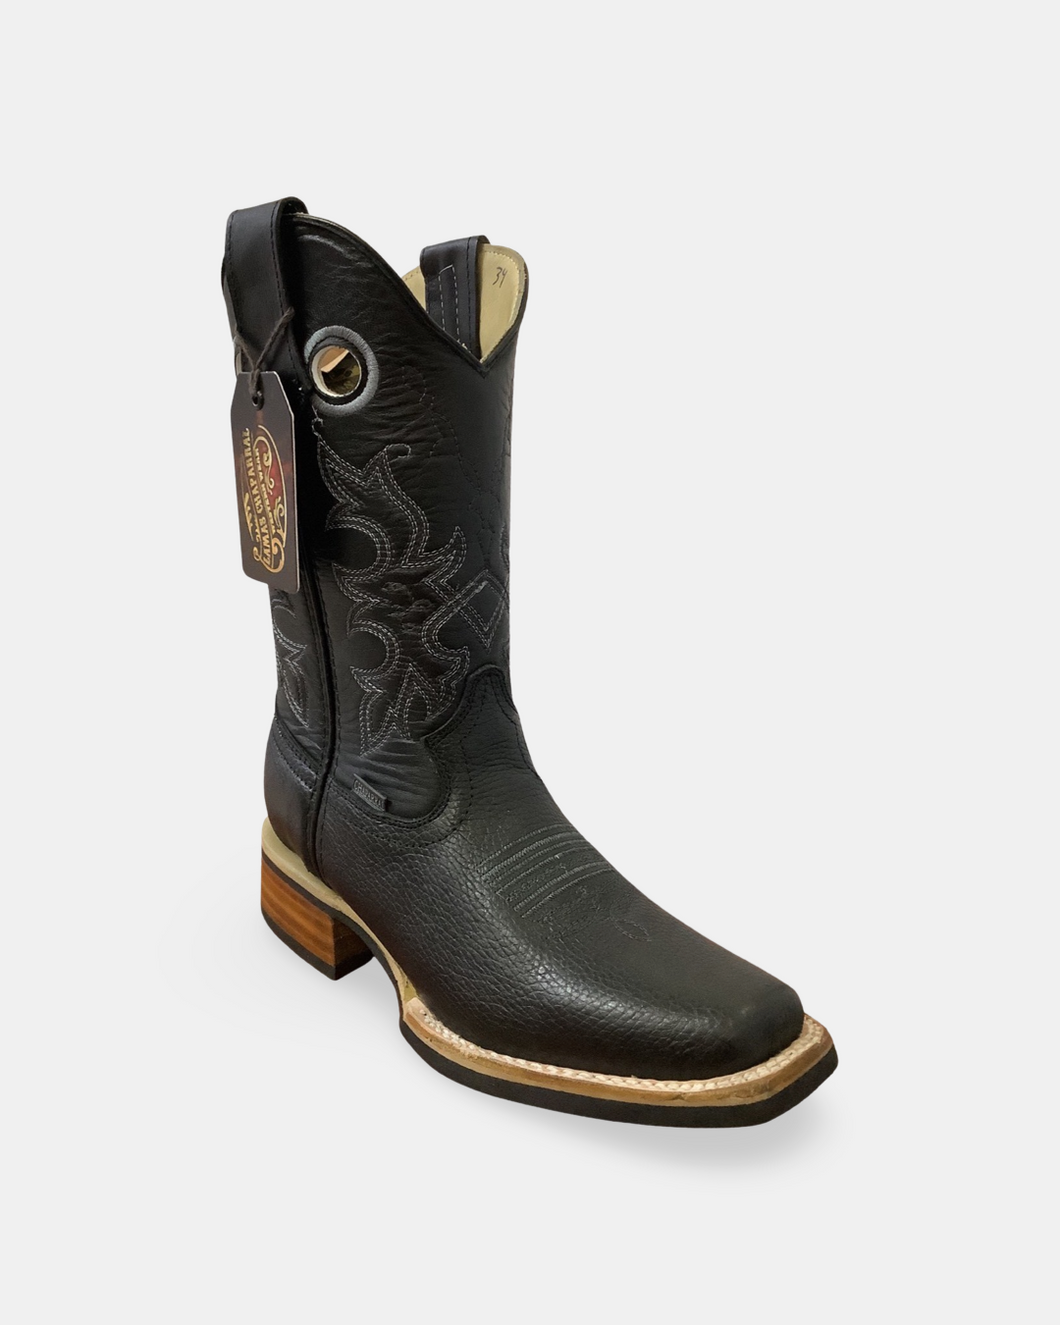 Chaparral 200 J Rodeo Black Boot